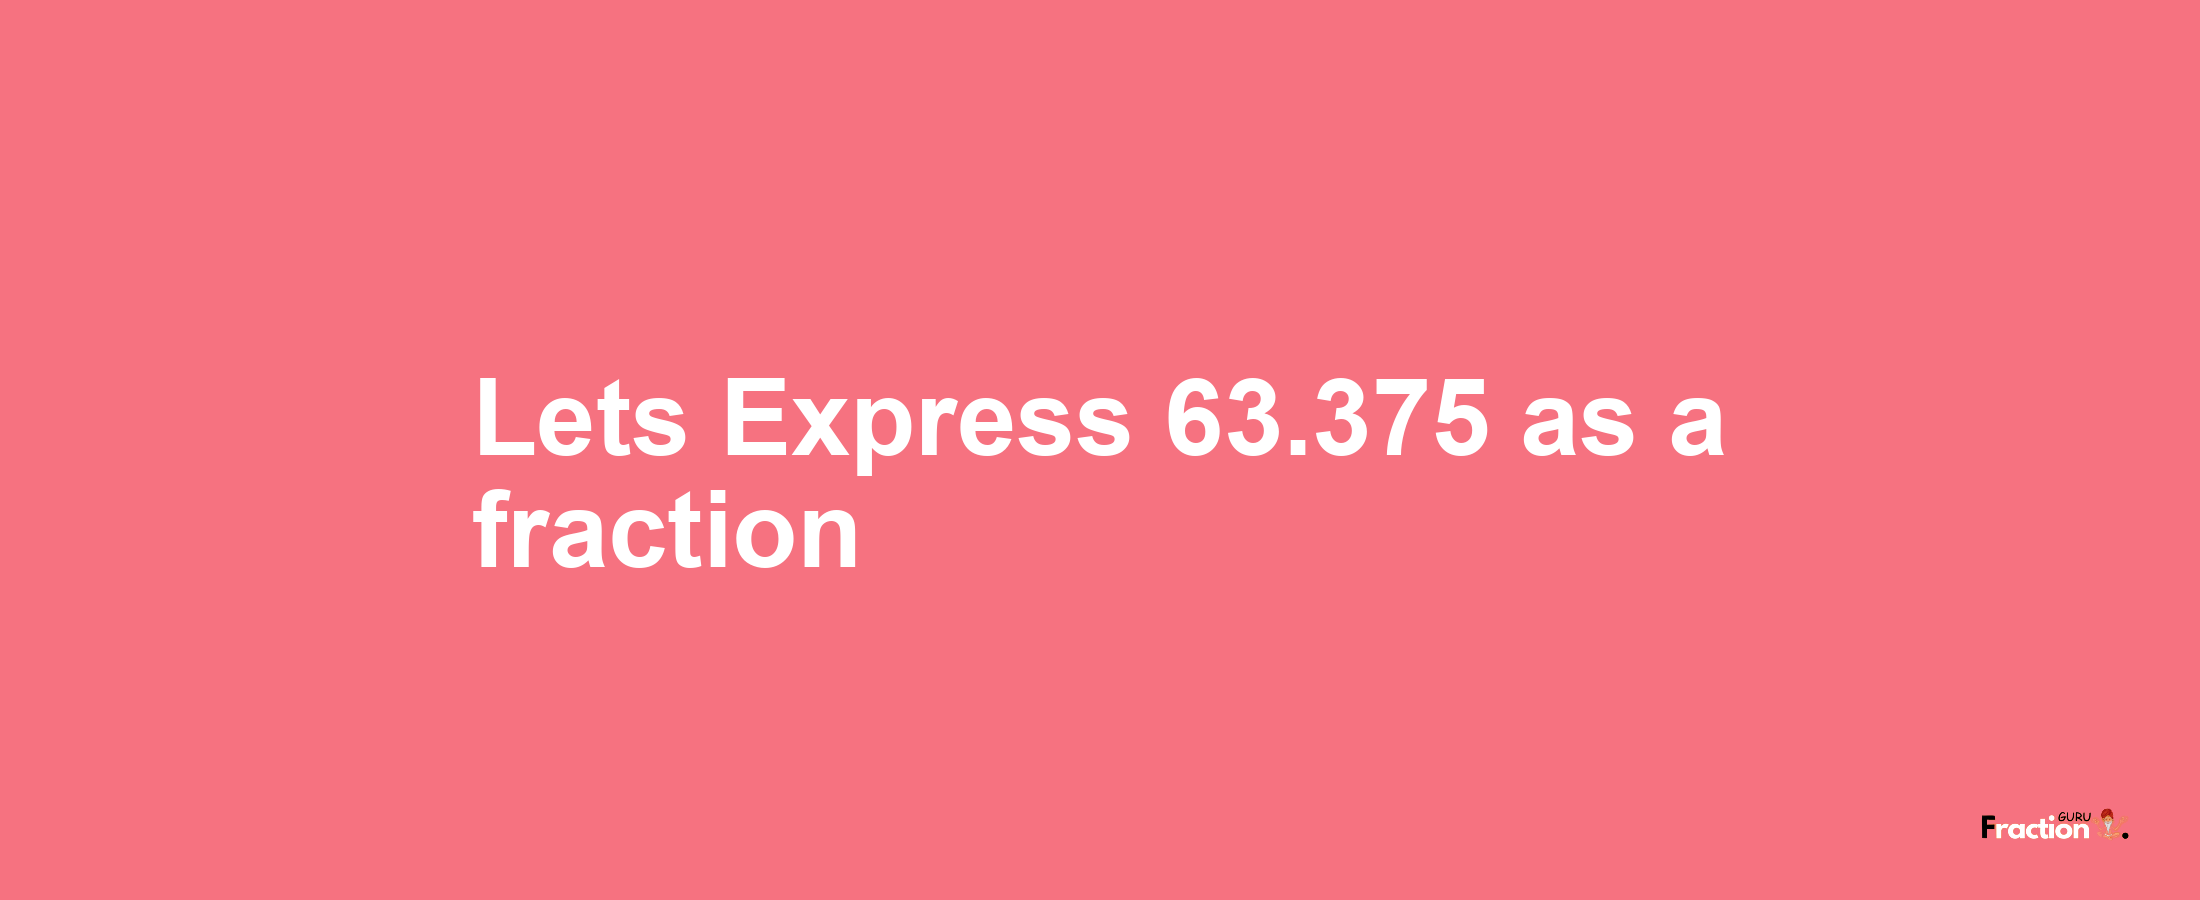 Lets Express 63.375 as afraction